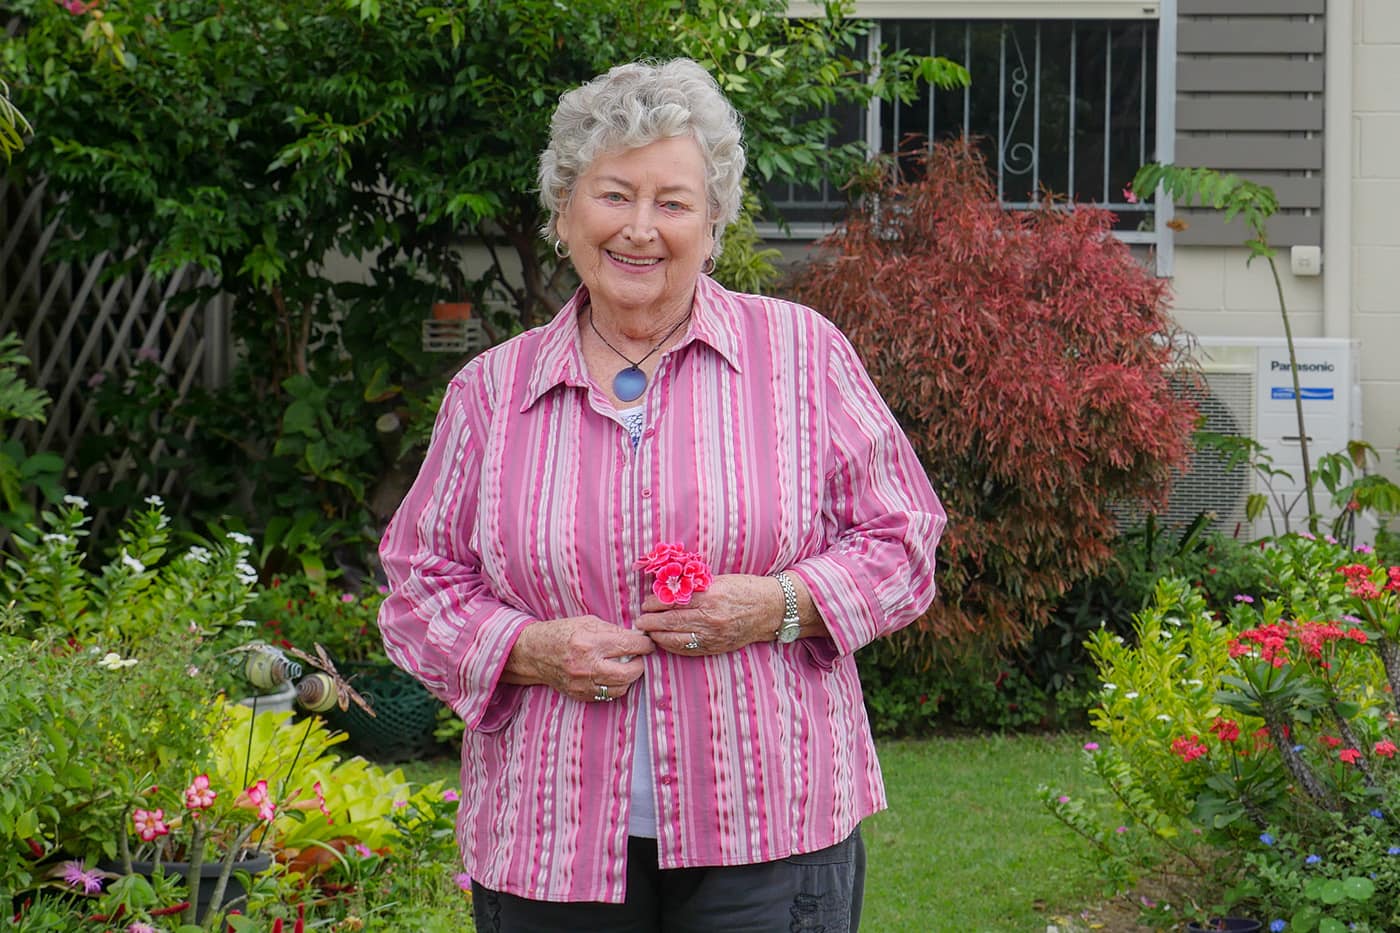 Home care recipient Patsy smiles in her garden